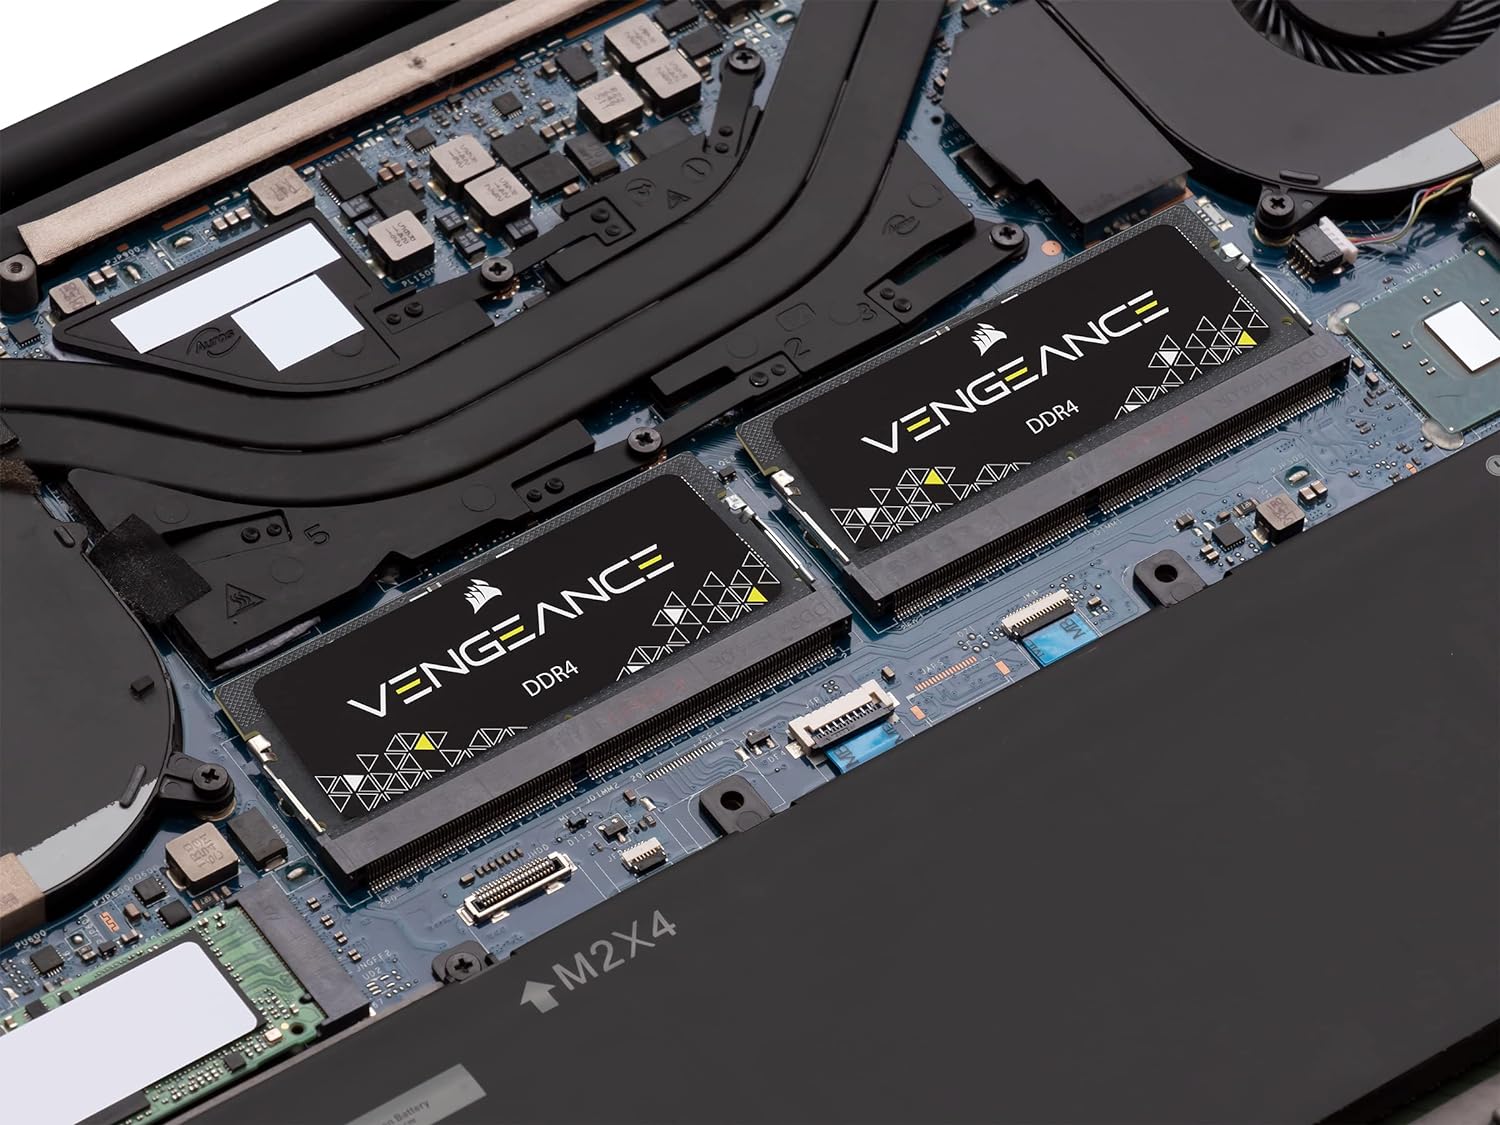 Corsair Vengeance Performance SODIMM Memory 32GB (2x16GB) DDR4 3200MHz CL22 Unbuffered for 8th Generation or Newer Intel Core™ i7, and AMD Ryzen 4000 Series Notebooks